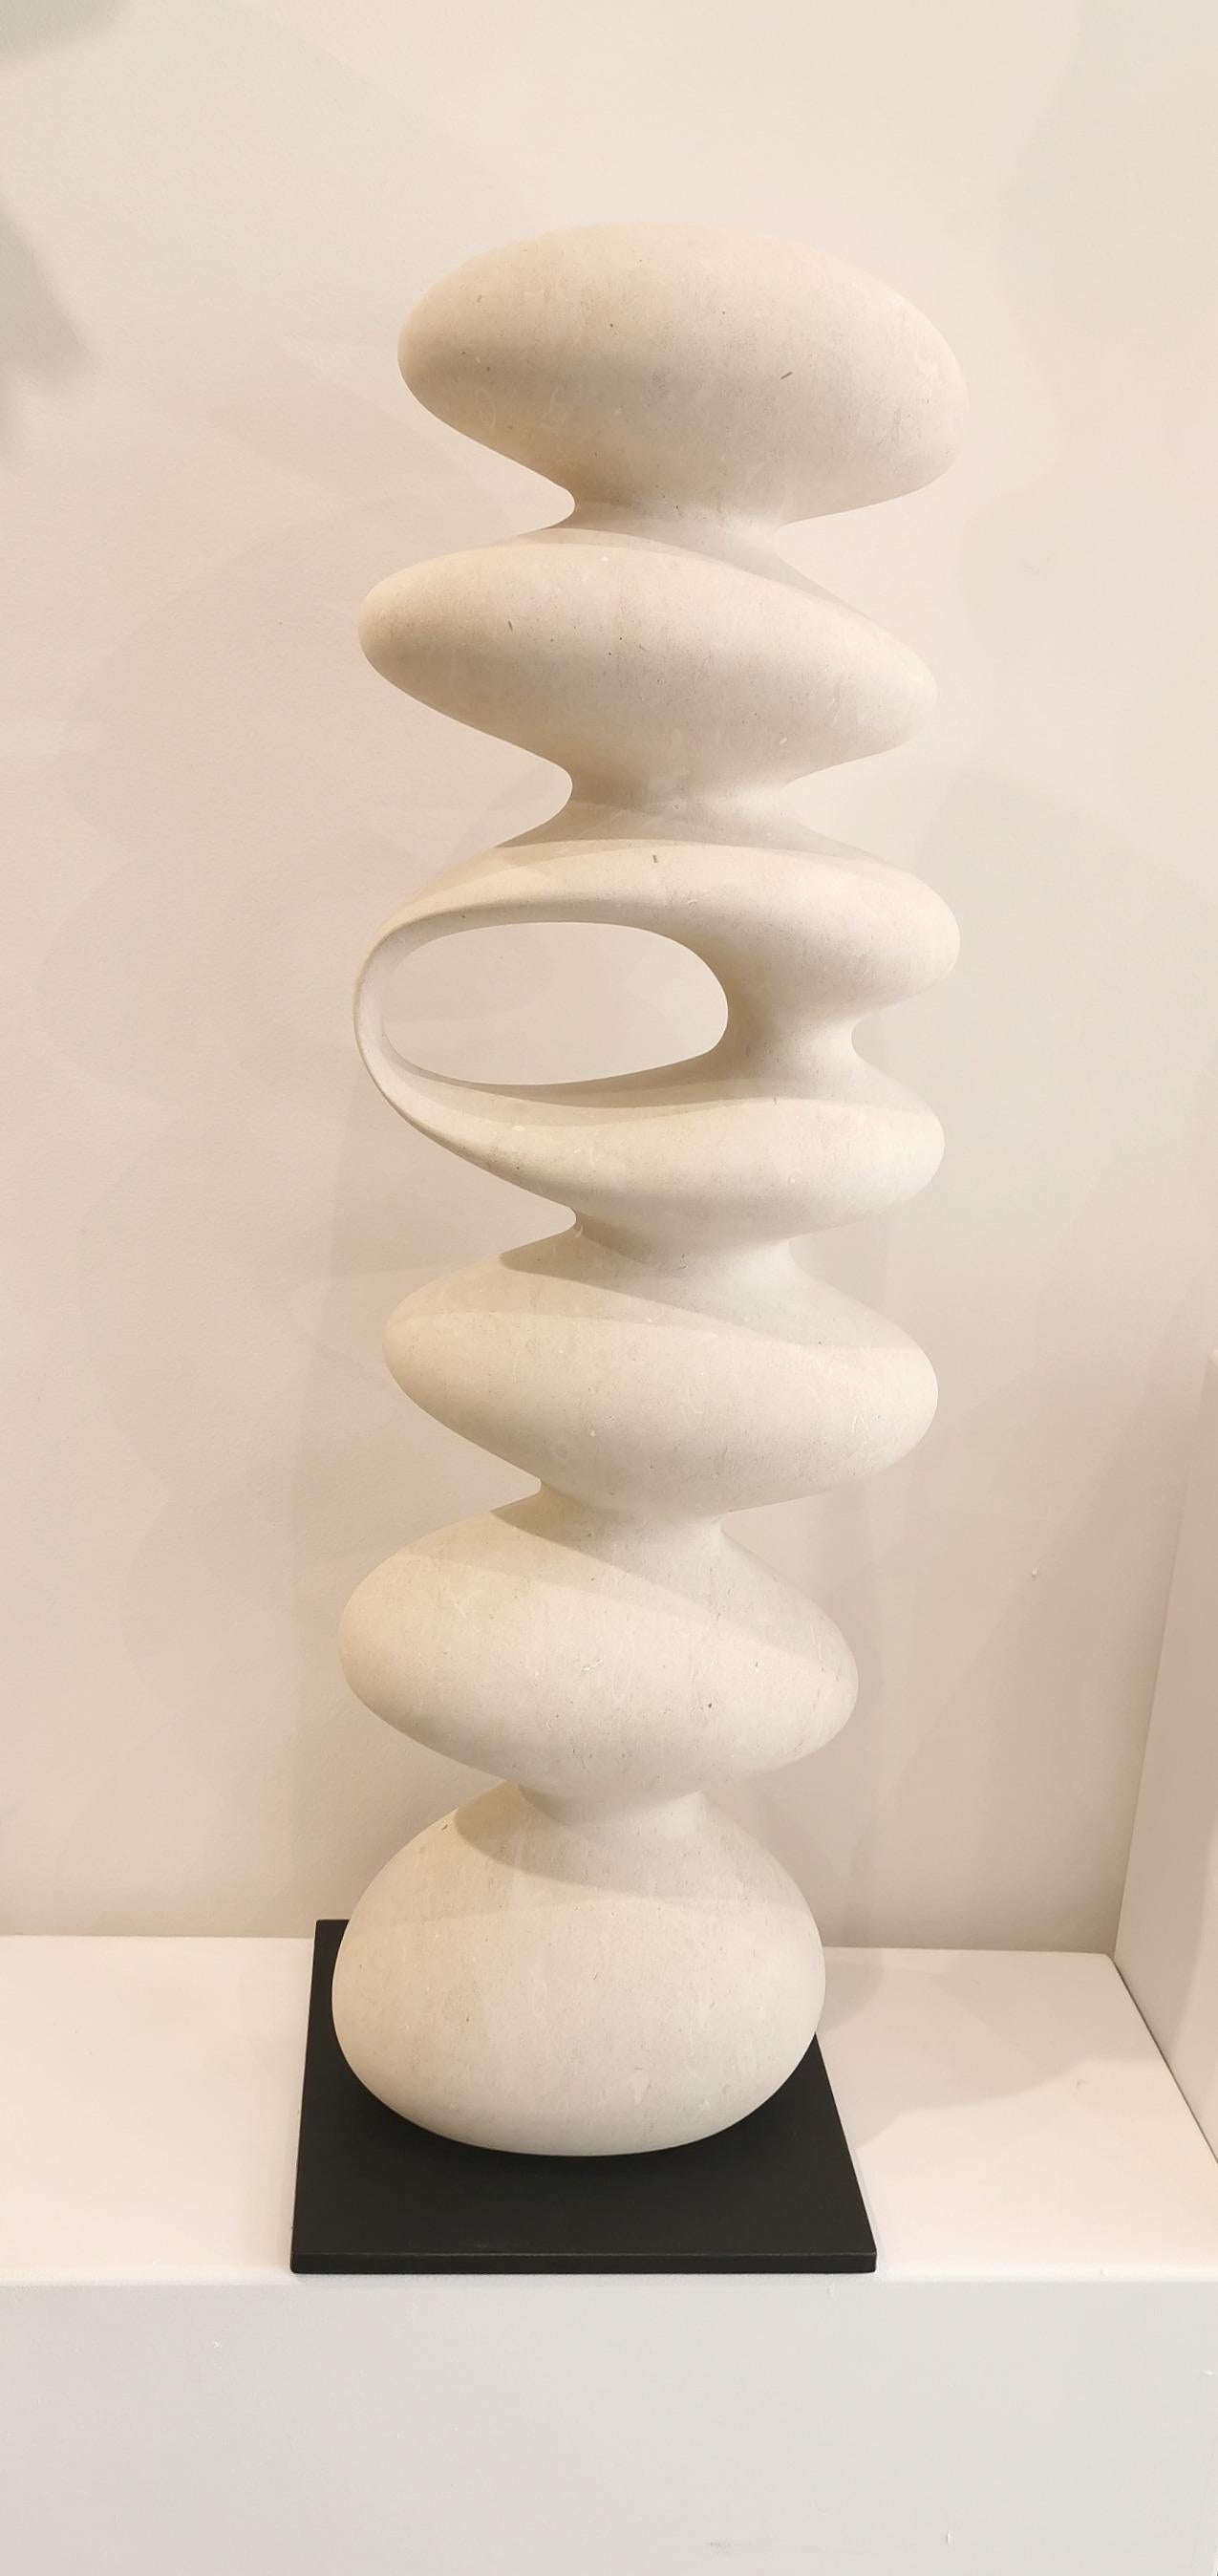 21st century abstract sculpture ETA by Renzo Buttazzo from Italy

Sculpture in Lecce Stone
Delivered with a certificate of authenticity.

Since 1886 Renzo Buttazzo work with Pietra Leccese (limestone from Lecce), and during this time he